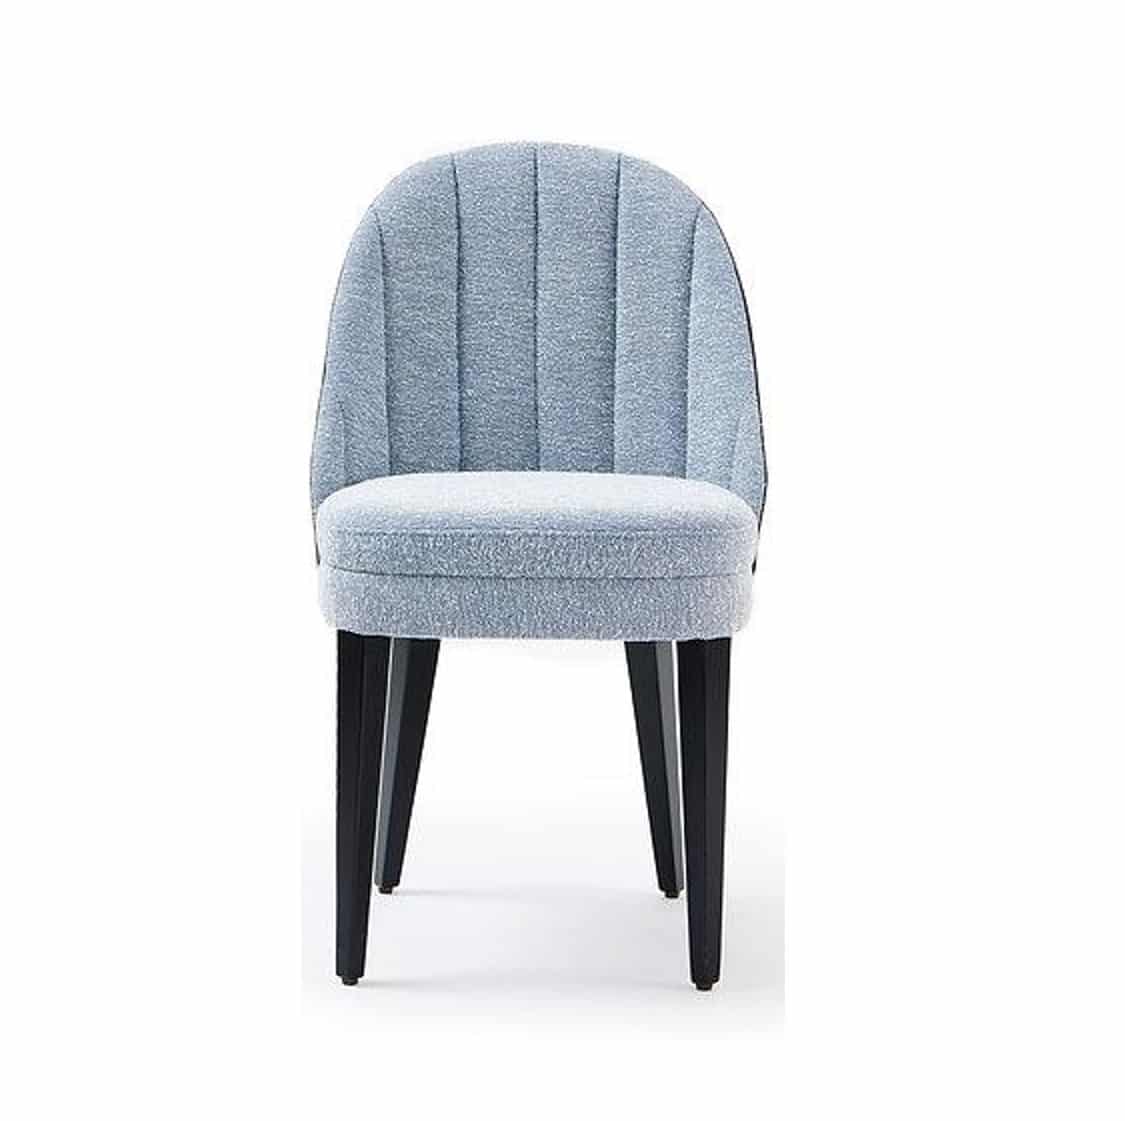 Corbetti Side Chair Fluted Back X8 at DeFrae Contract Furniture